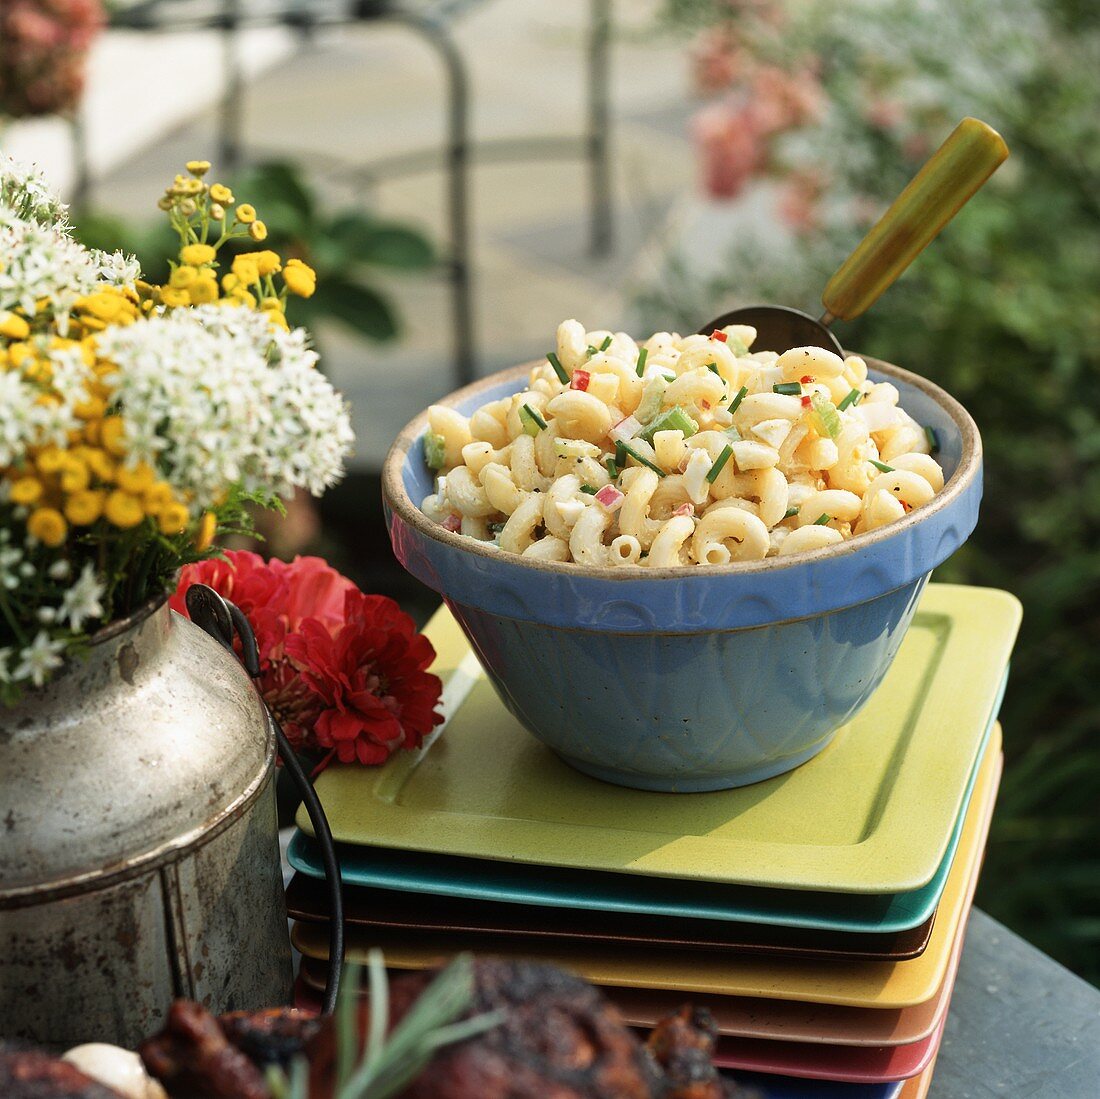 Pasta salad in blue bowl on pile of plates (outdoors)